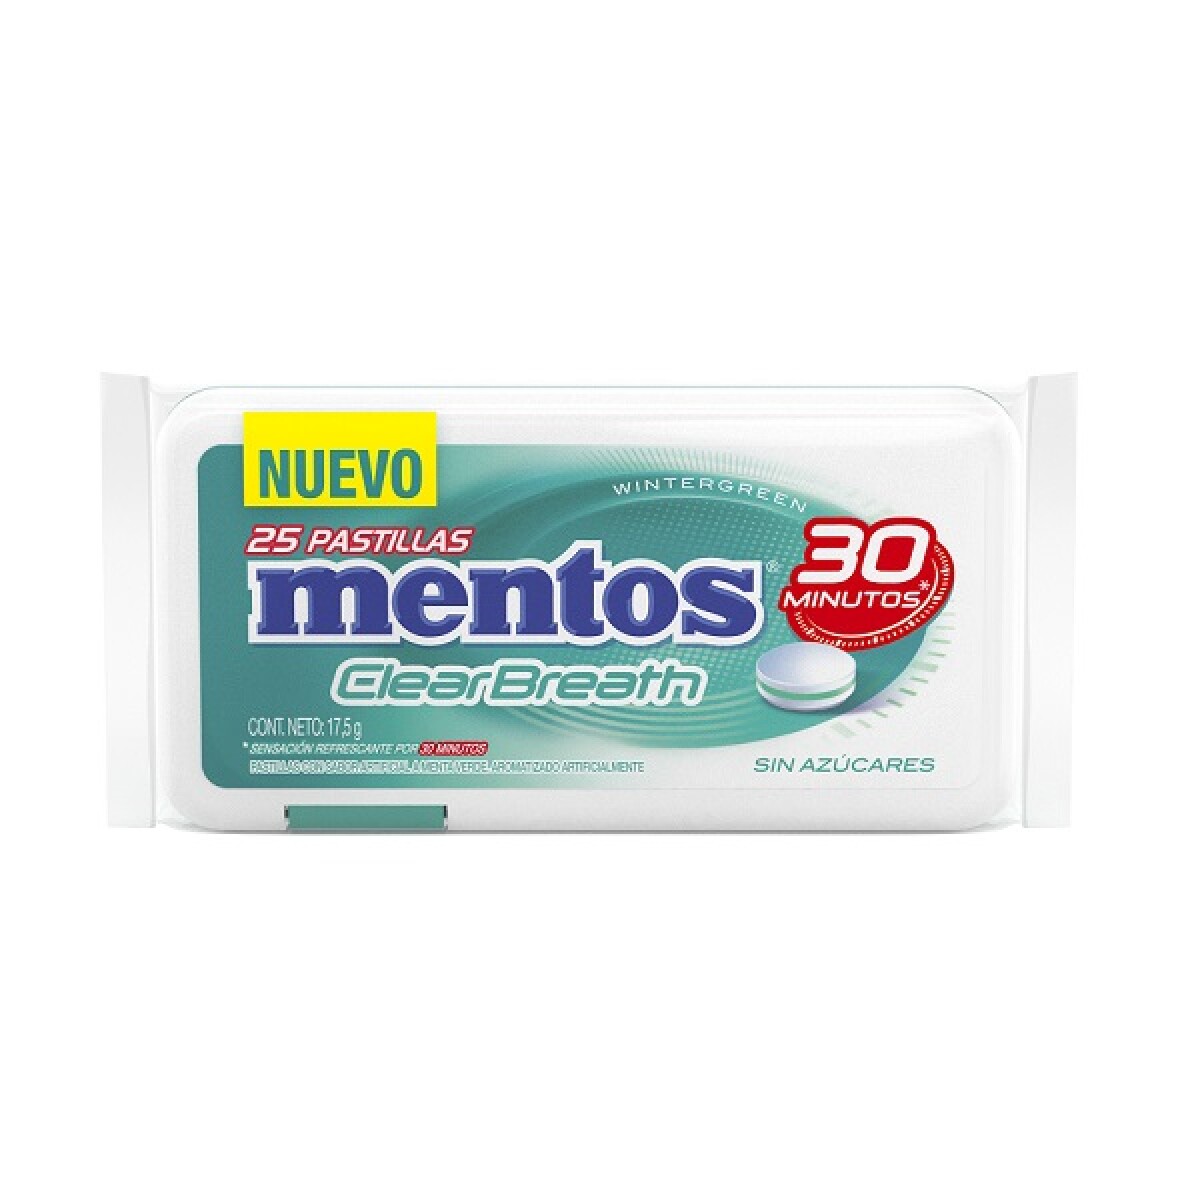 Mentos Clearbreath Wintergreen 17.5 Grs. 